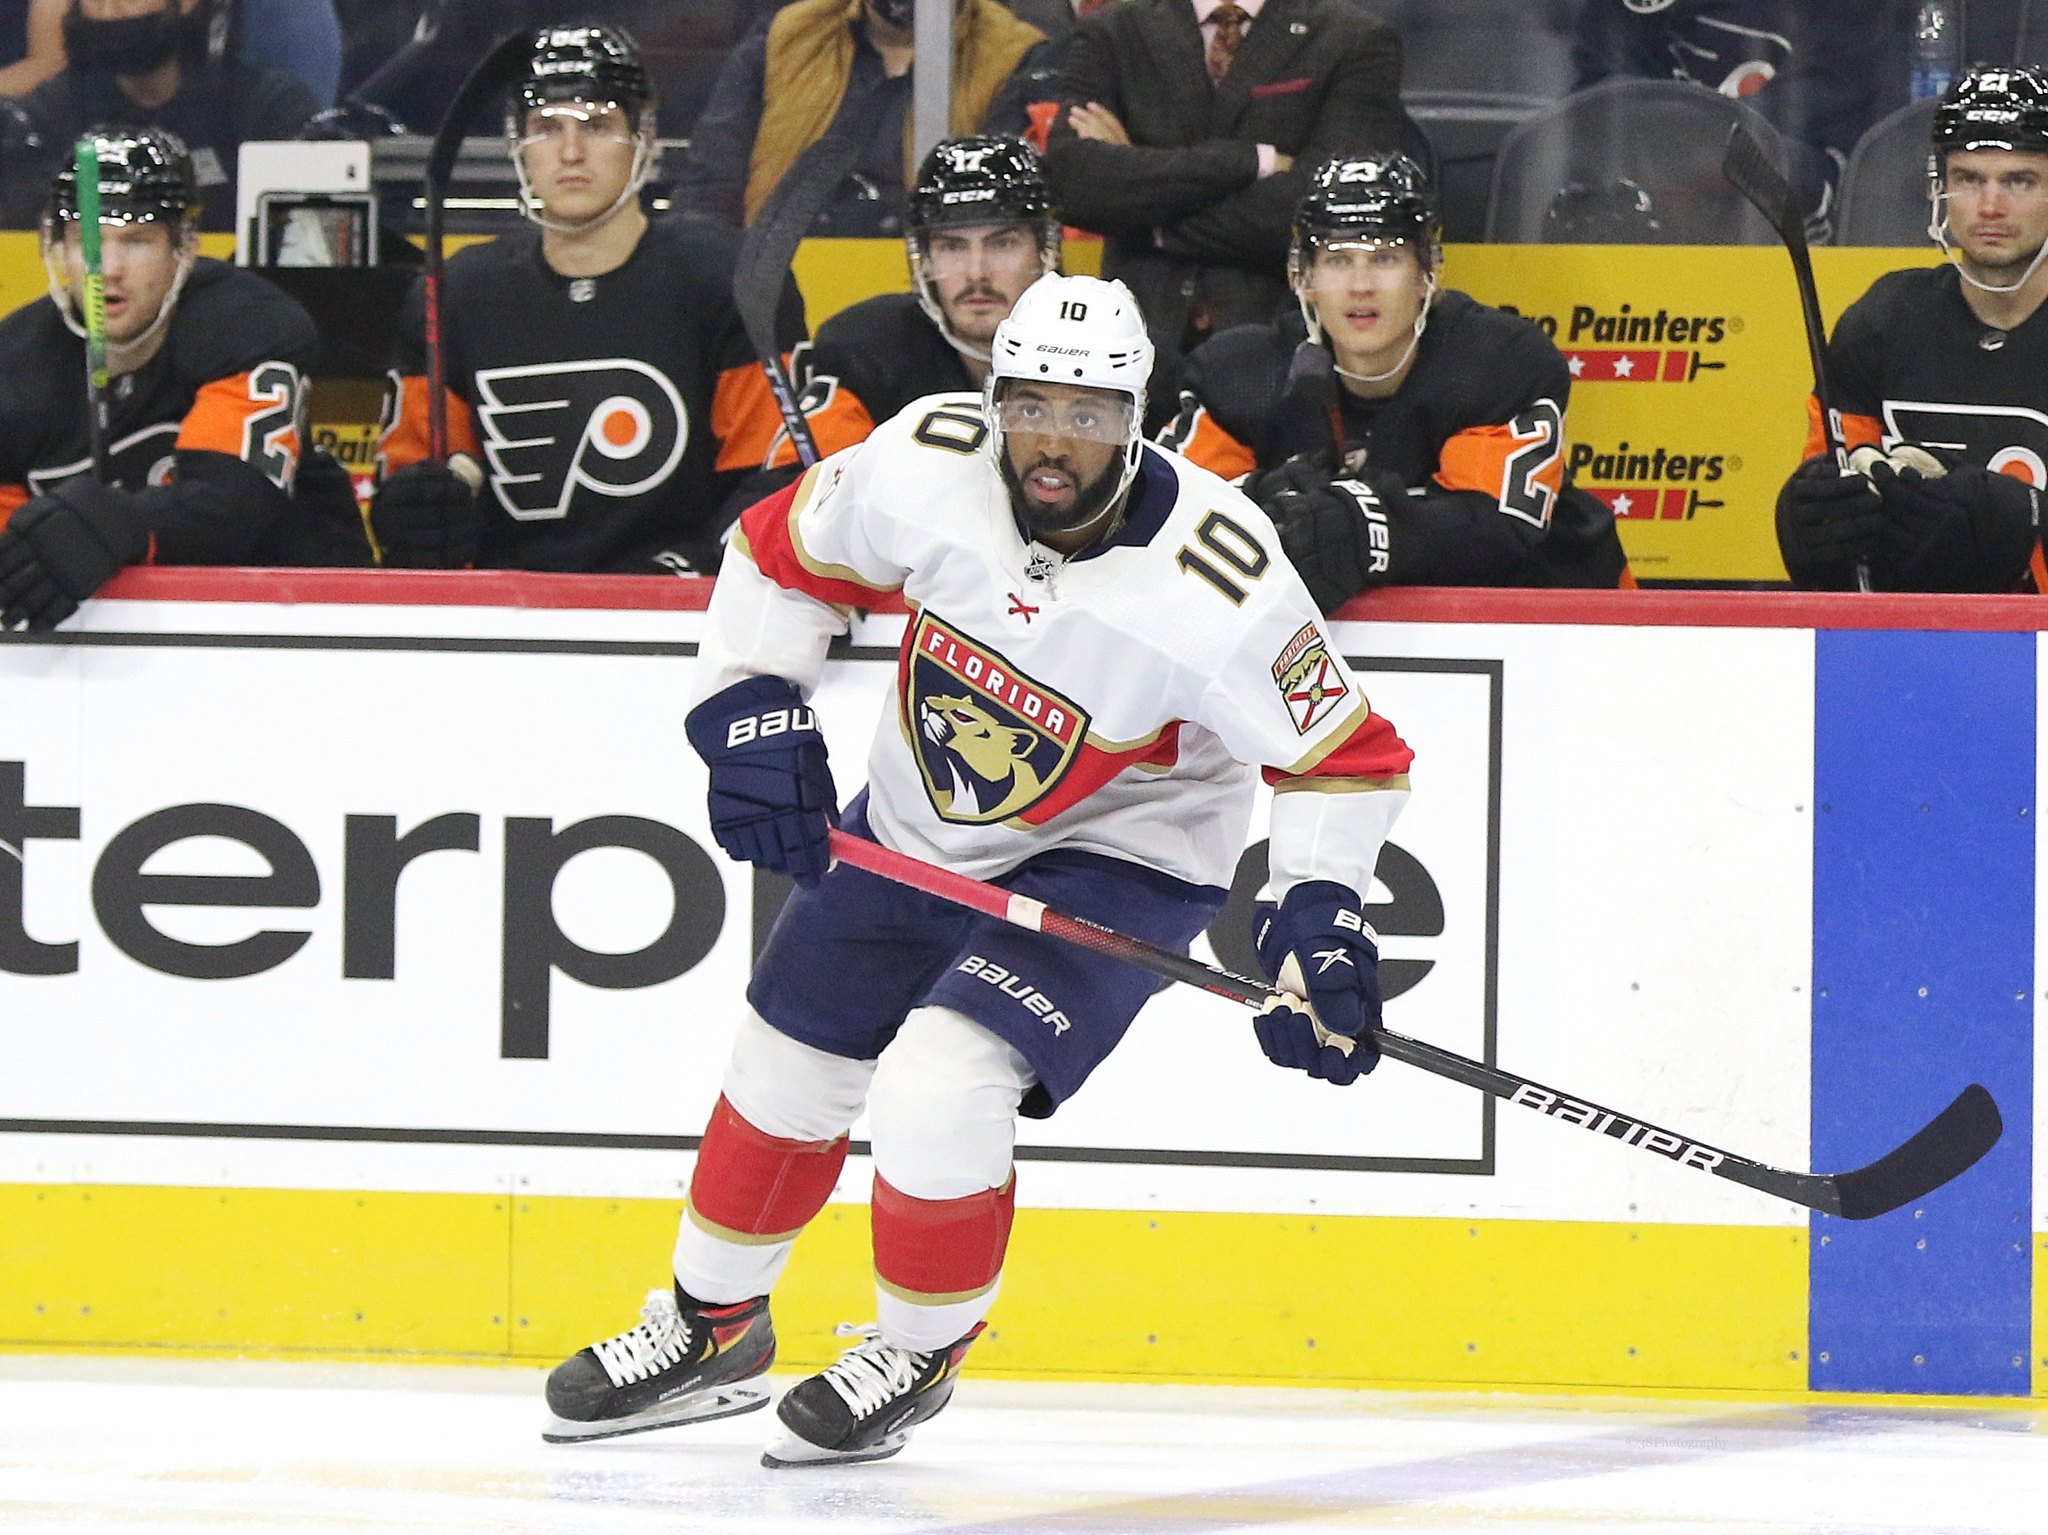 Flames Should Look to Make a Deal for Panthers’ Duclair